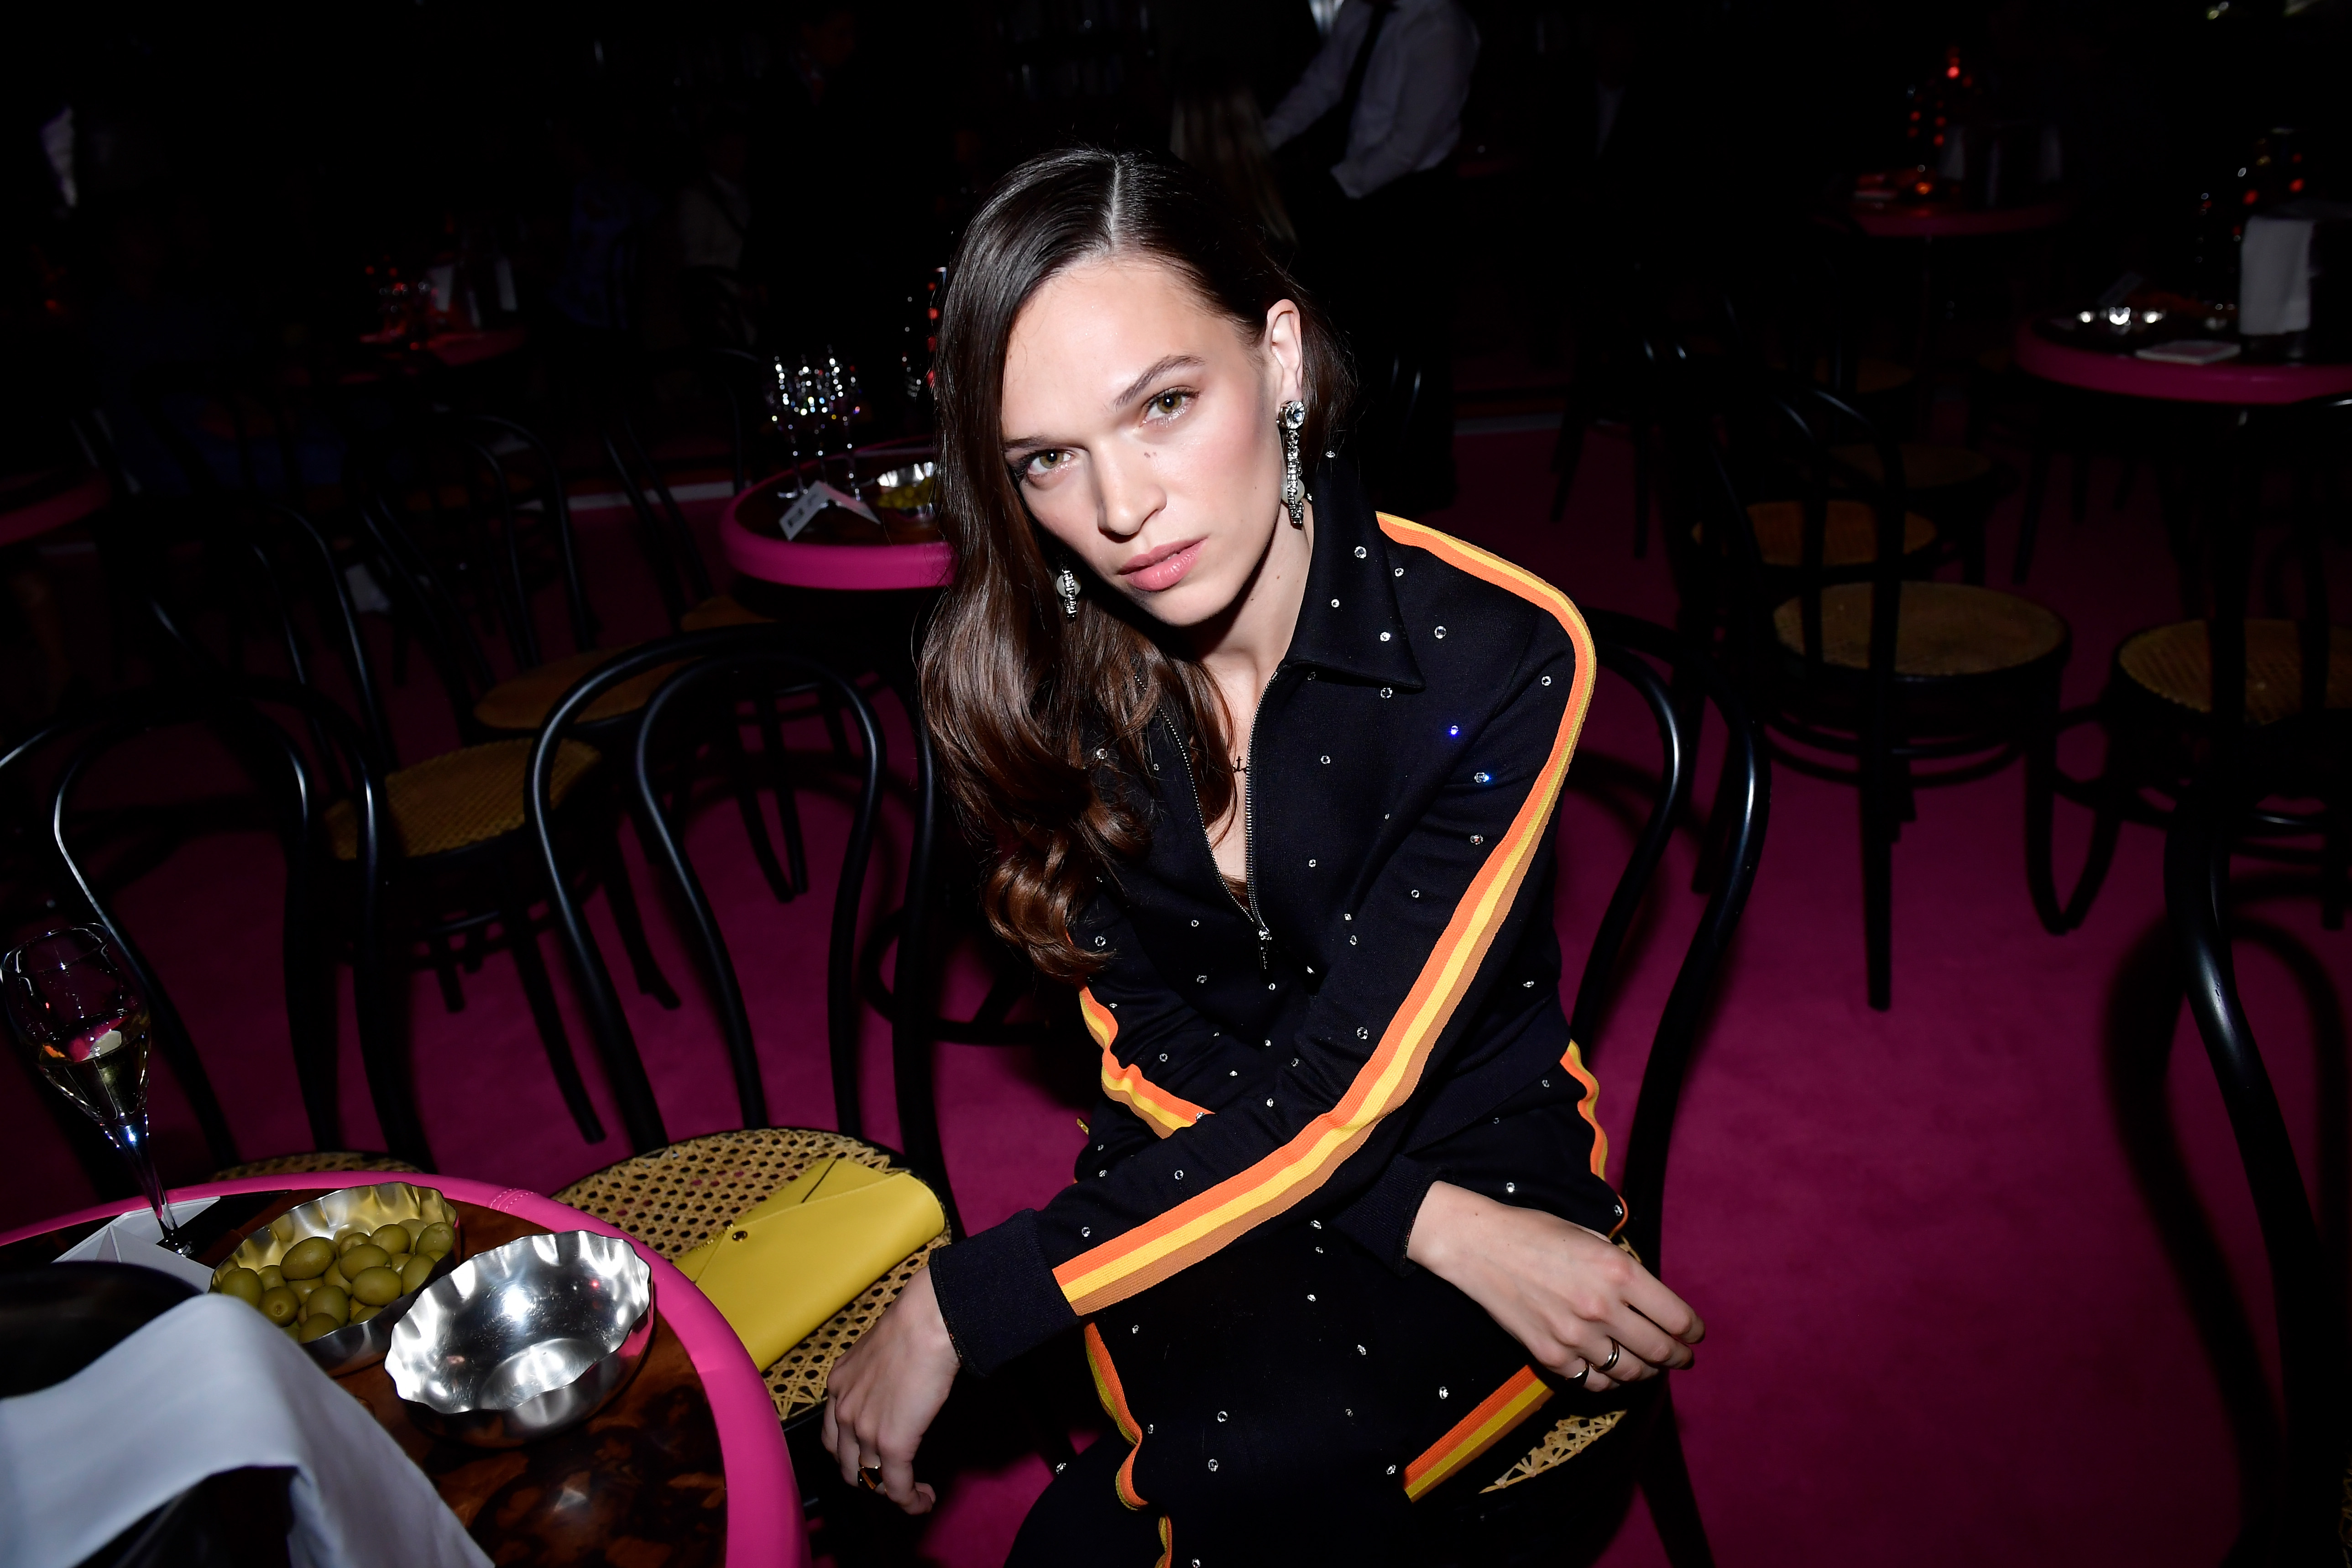 PARIS, FRANCE - JULY 02:  Anna Brewster attends Miu Miu Cruise Collection show as part of Haute Couture Paris Fashion Week on July 2, 2017 in Paris, France.  (Photo by Victor Boyko/Getty Images for Miu Miu) *** Local Caption *** Anna Brewster